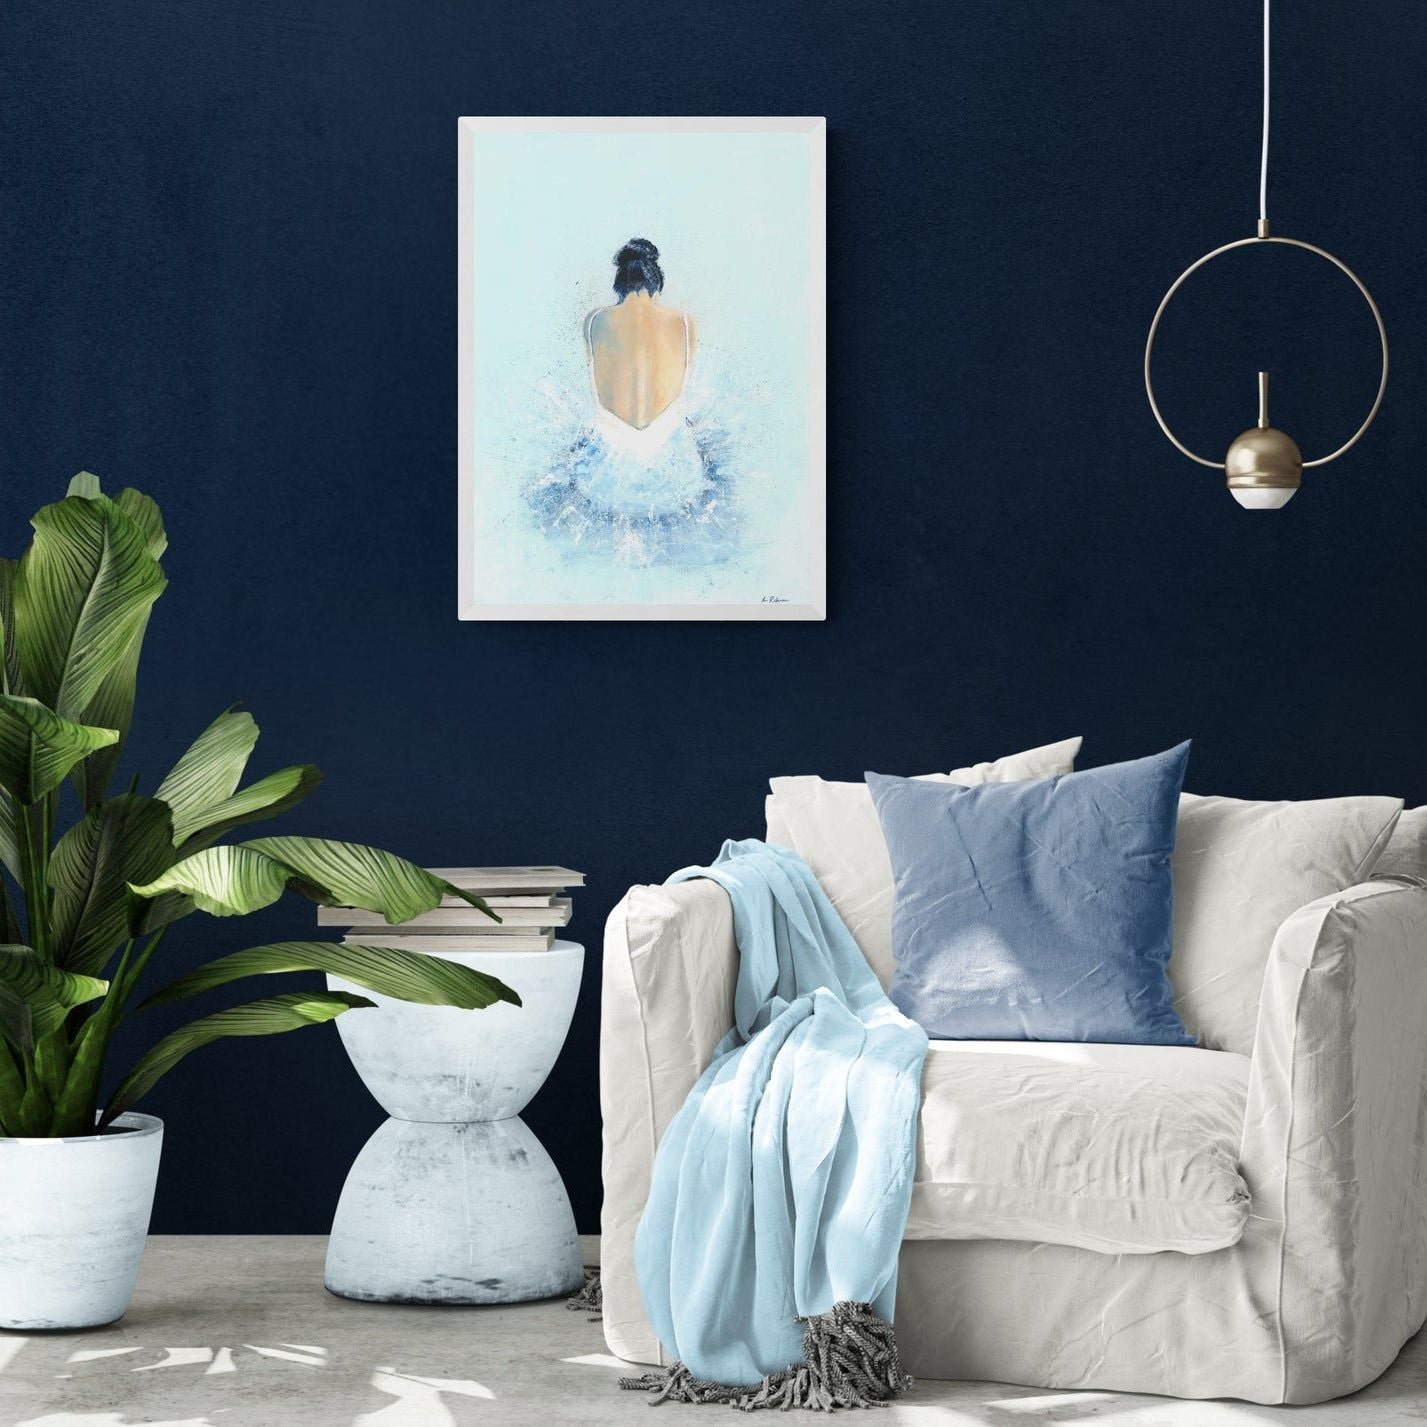 A print of an acrylic painting of a woman sat on the floor wearing a tutu.  The painting is on a dark blue wall in a living room setting with a cream sofa and a potted plant